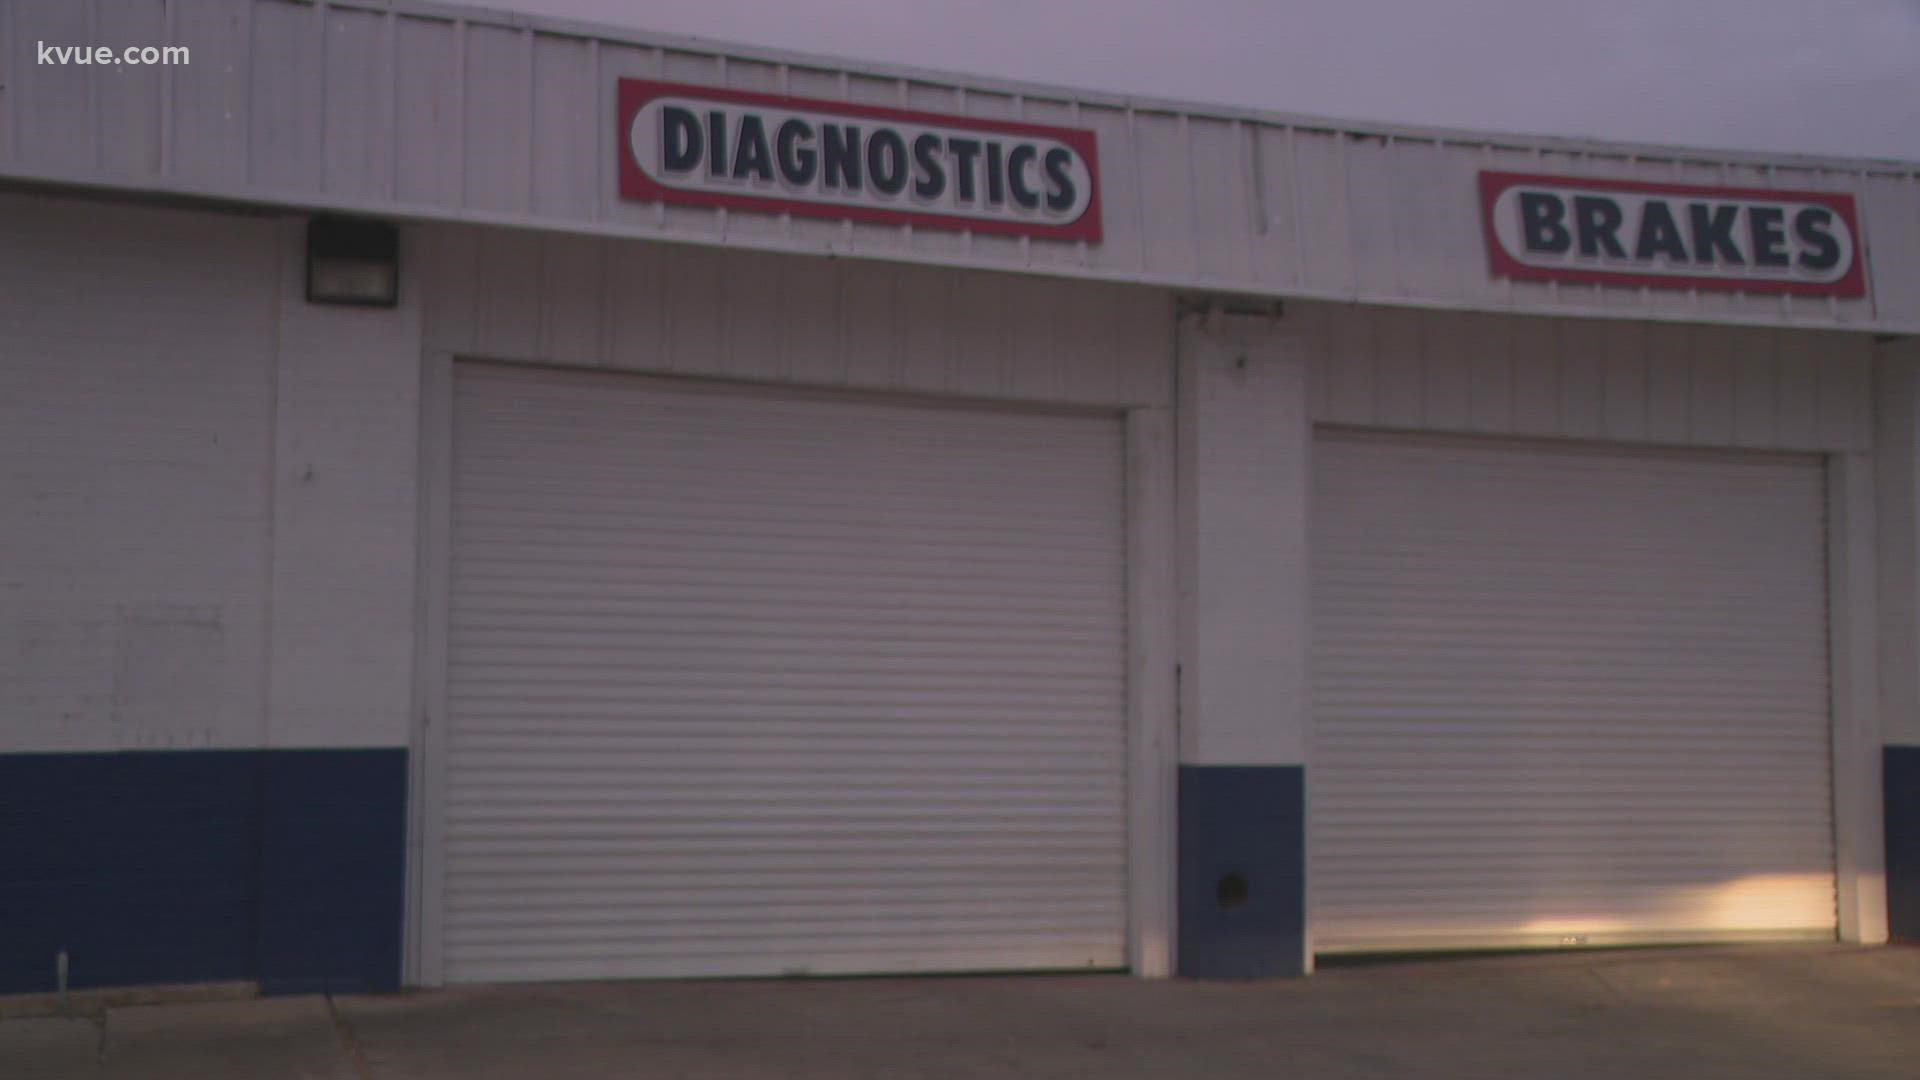 One Round Rock mechanic says there have been moments where his hands get so cold that his hands become numb.